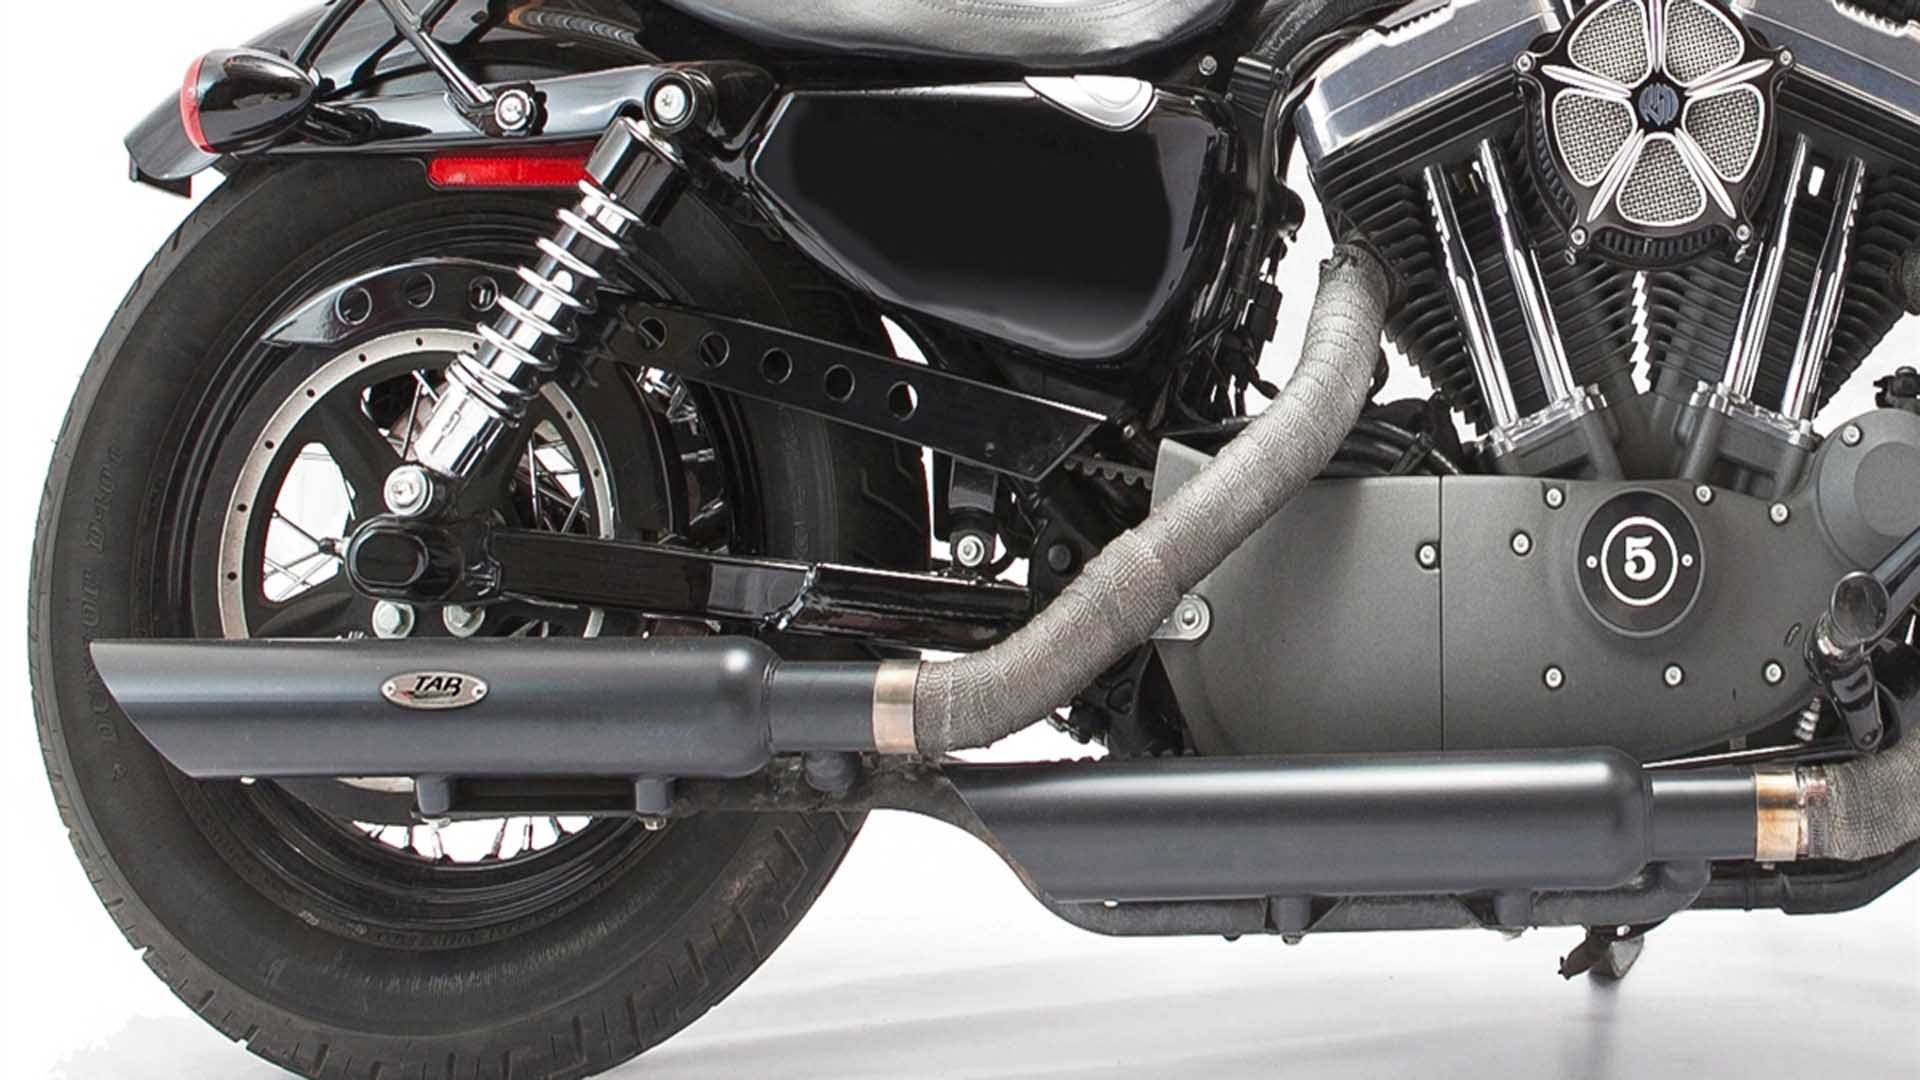 how to install slip on exhaust harley sportster - cloudridernetworks.com.